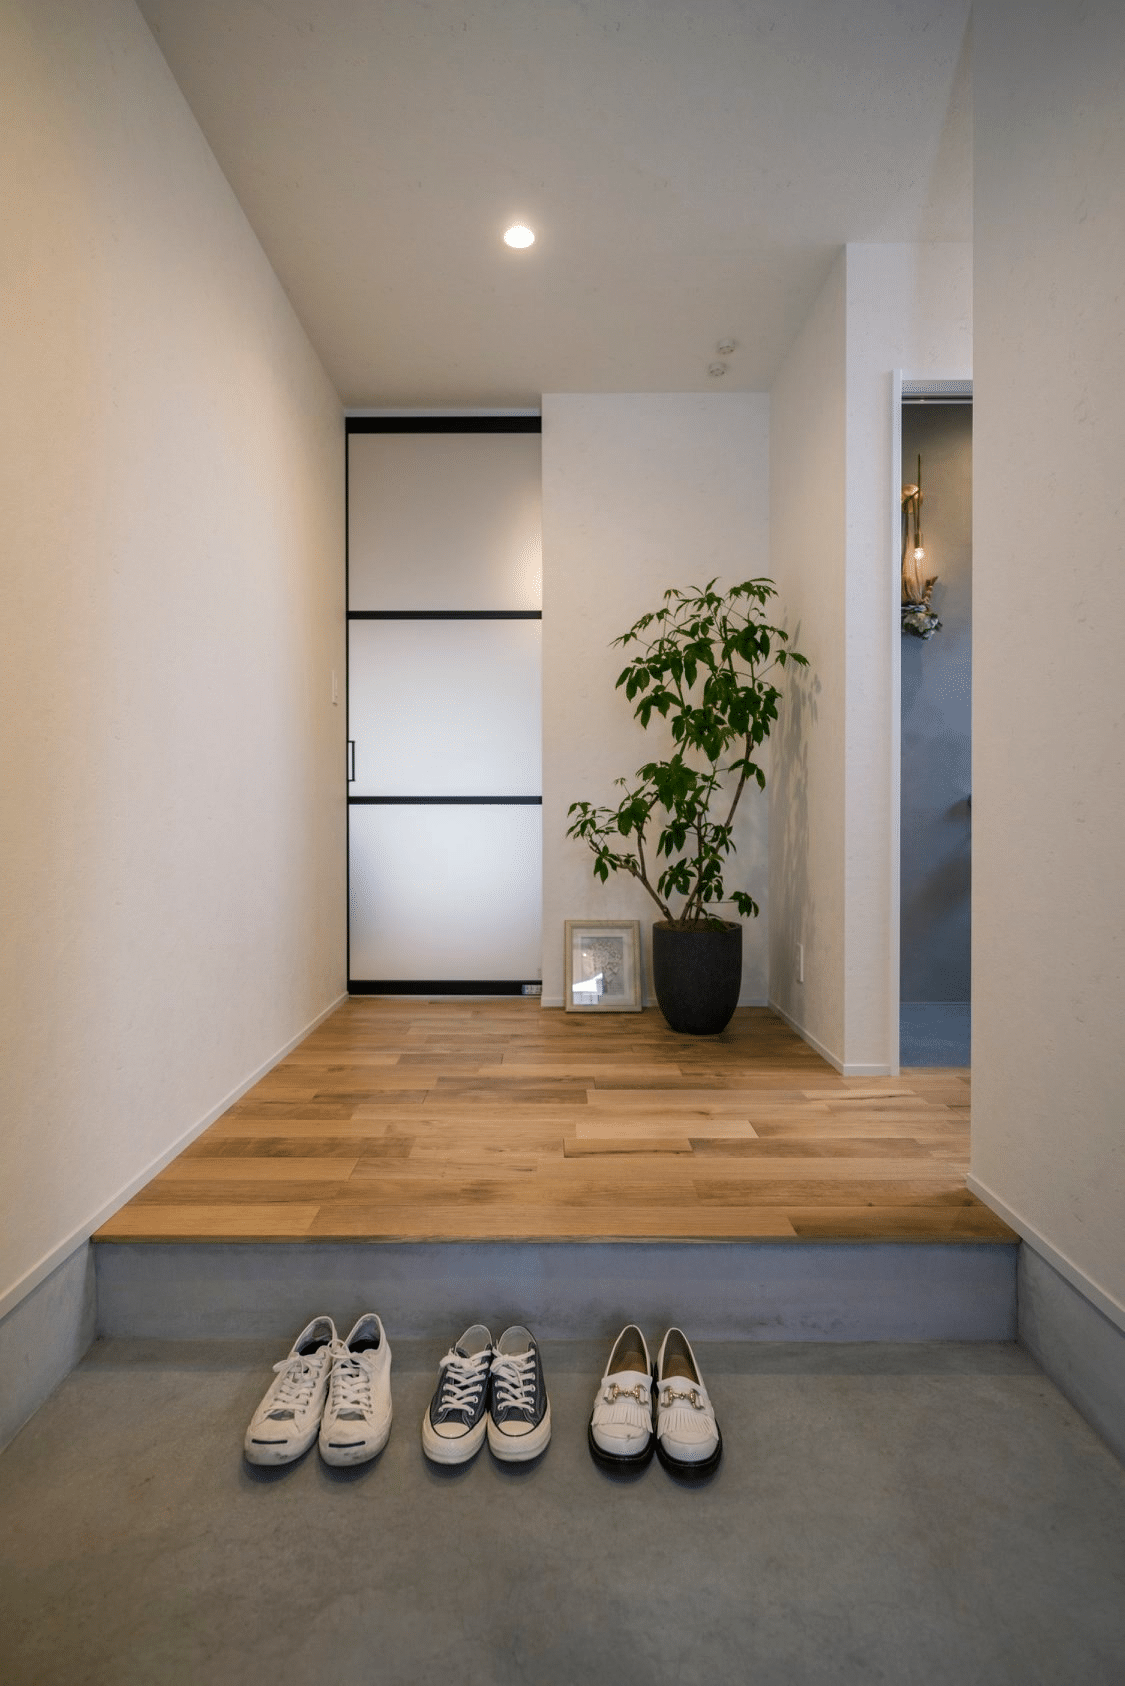 Muji inspired interior design with elevated platforms 